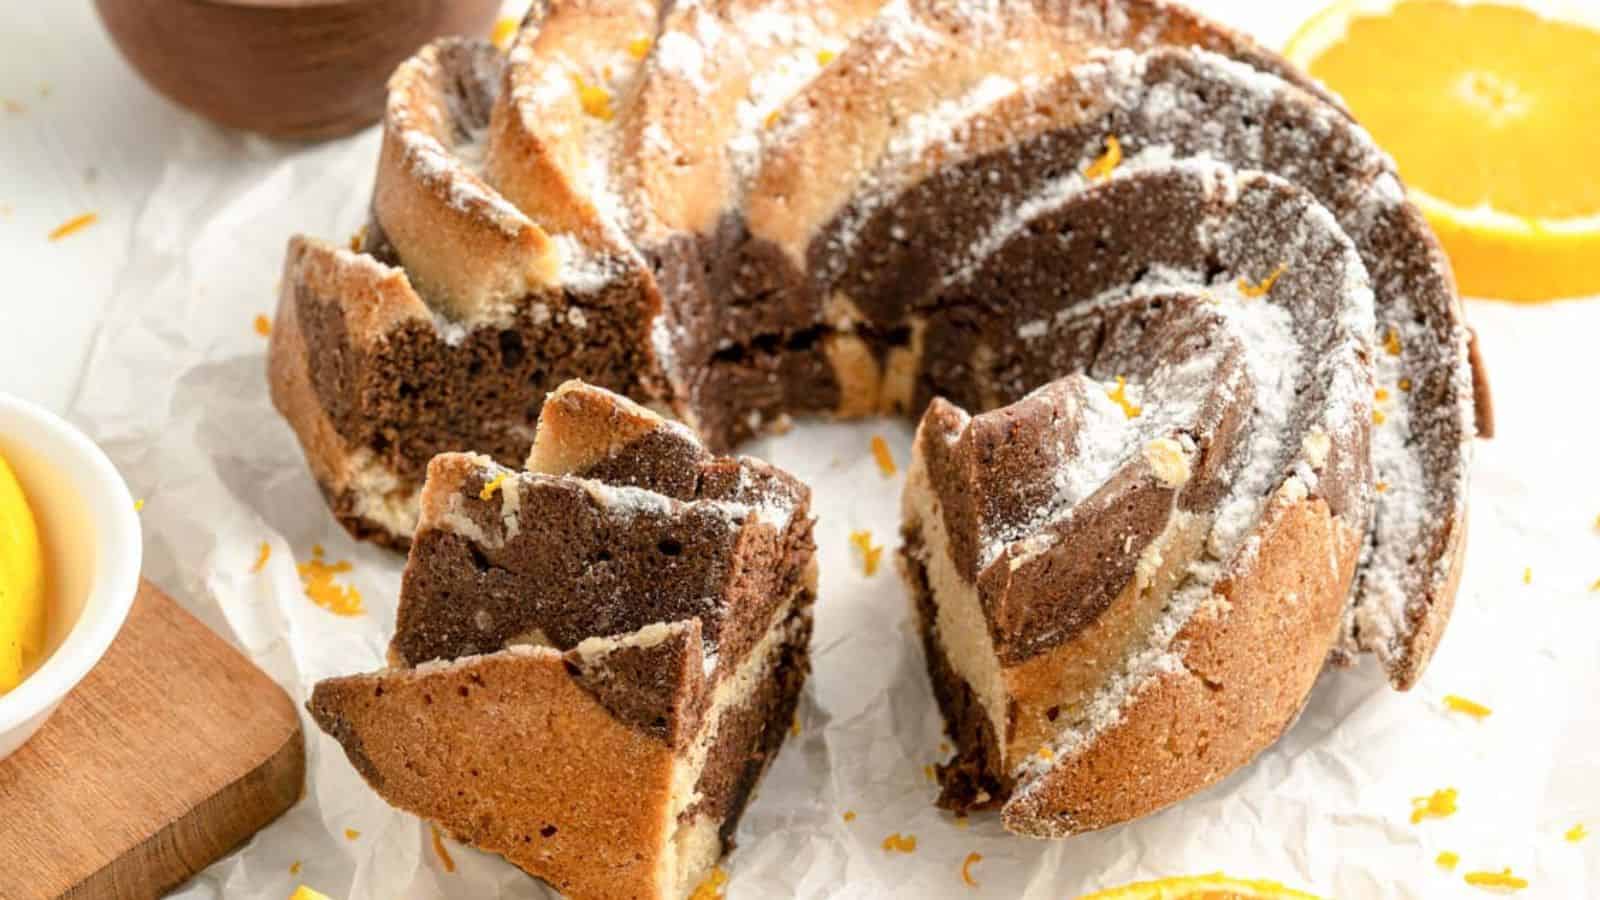 <p>Ready to take yourself on a flavor moment? Look no further than our vegan chocolate orange marble bundt cake! Whether you’re celebrating a special occasion or just treating yourself to something delicious, this cake is sure to hit the spot. And the best part? It’s vegan-friendly, so everyone can enjoy a slice of dessert perfection.<br><strong>Get the Recipe: </strong><a href="https://twocityvegans.com/chocolate-orange-marble-bundt-cake/?utm_source=msn&utm_medium=page&utm_campaign=msn">Vegan Chocolate Orange Marble Bundt Cake</a></p>